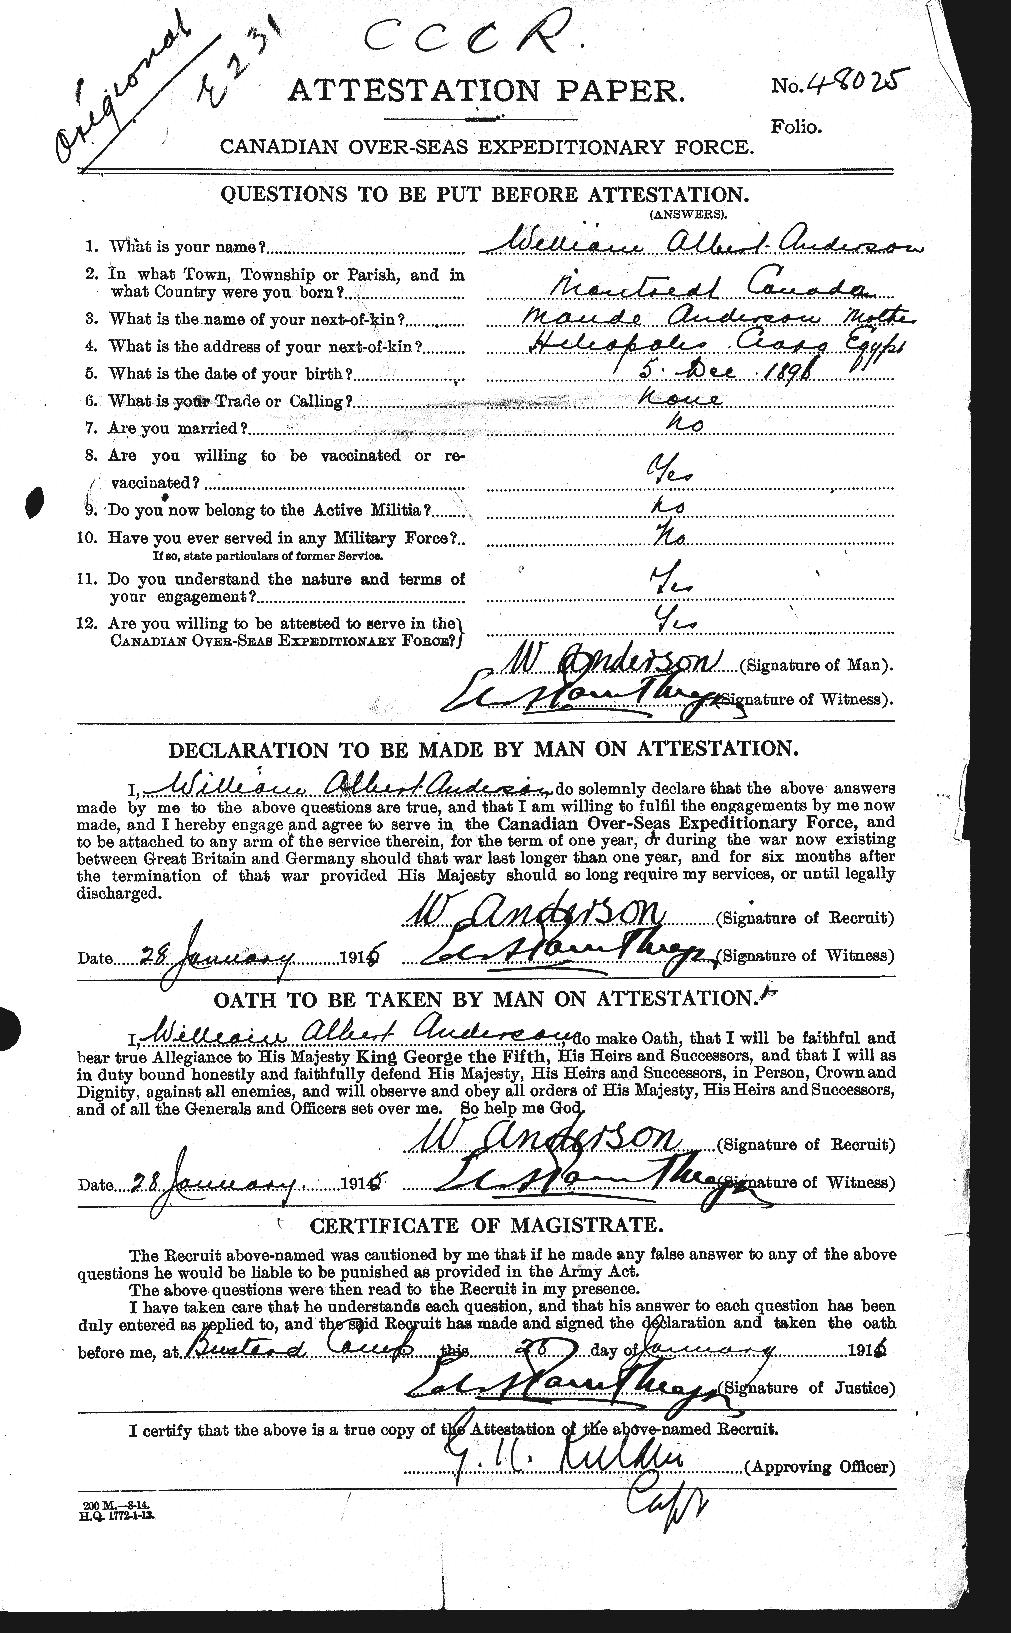 Personnel Records of the First World War - CEF 210749a